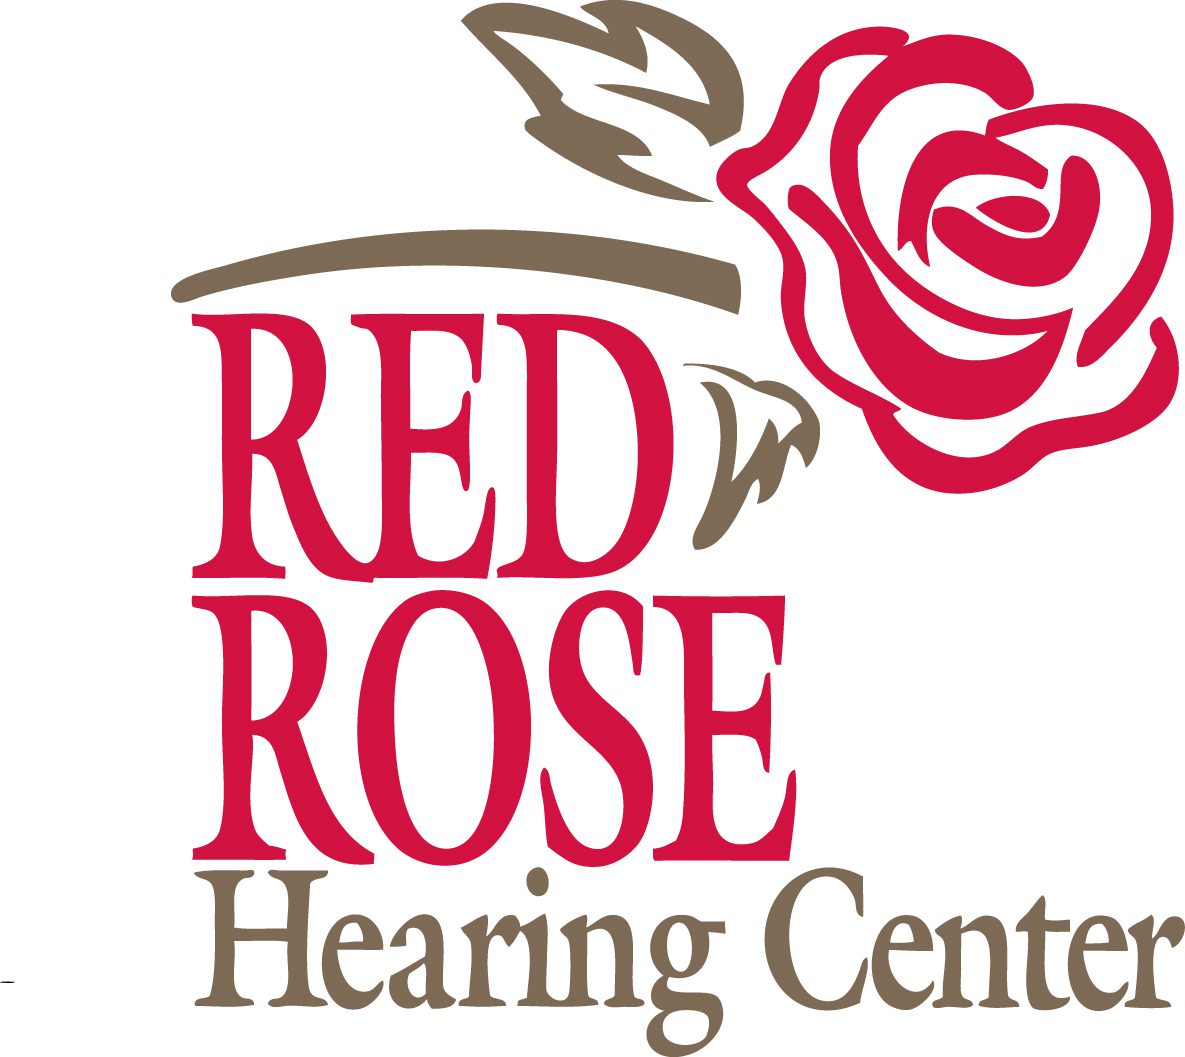 Red Rose Hearing Center